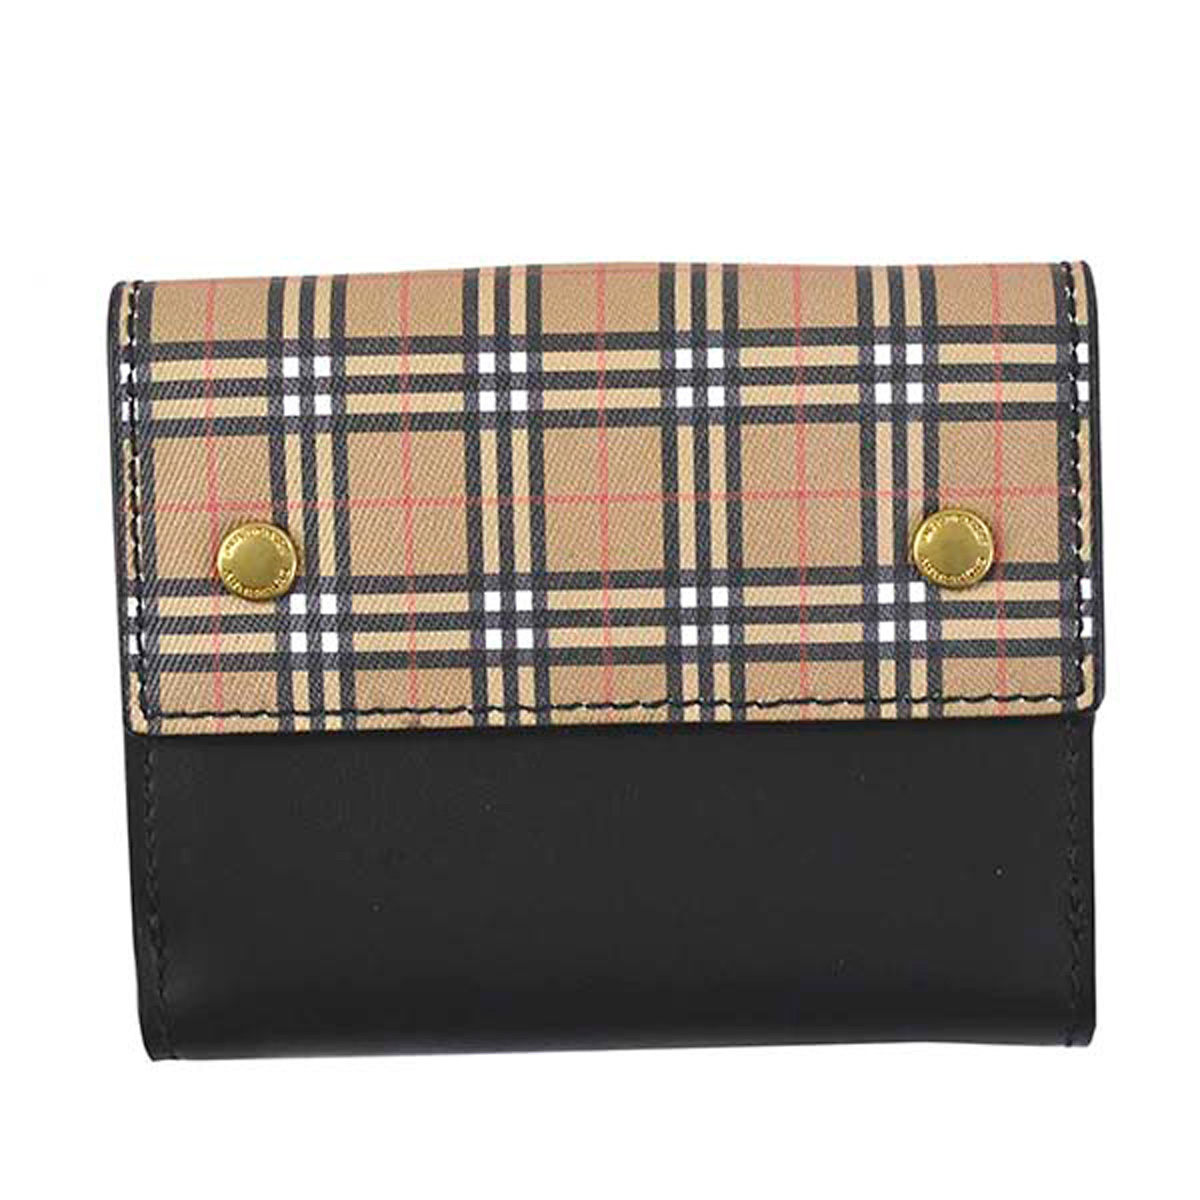 burberry yellow wallet